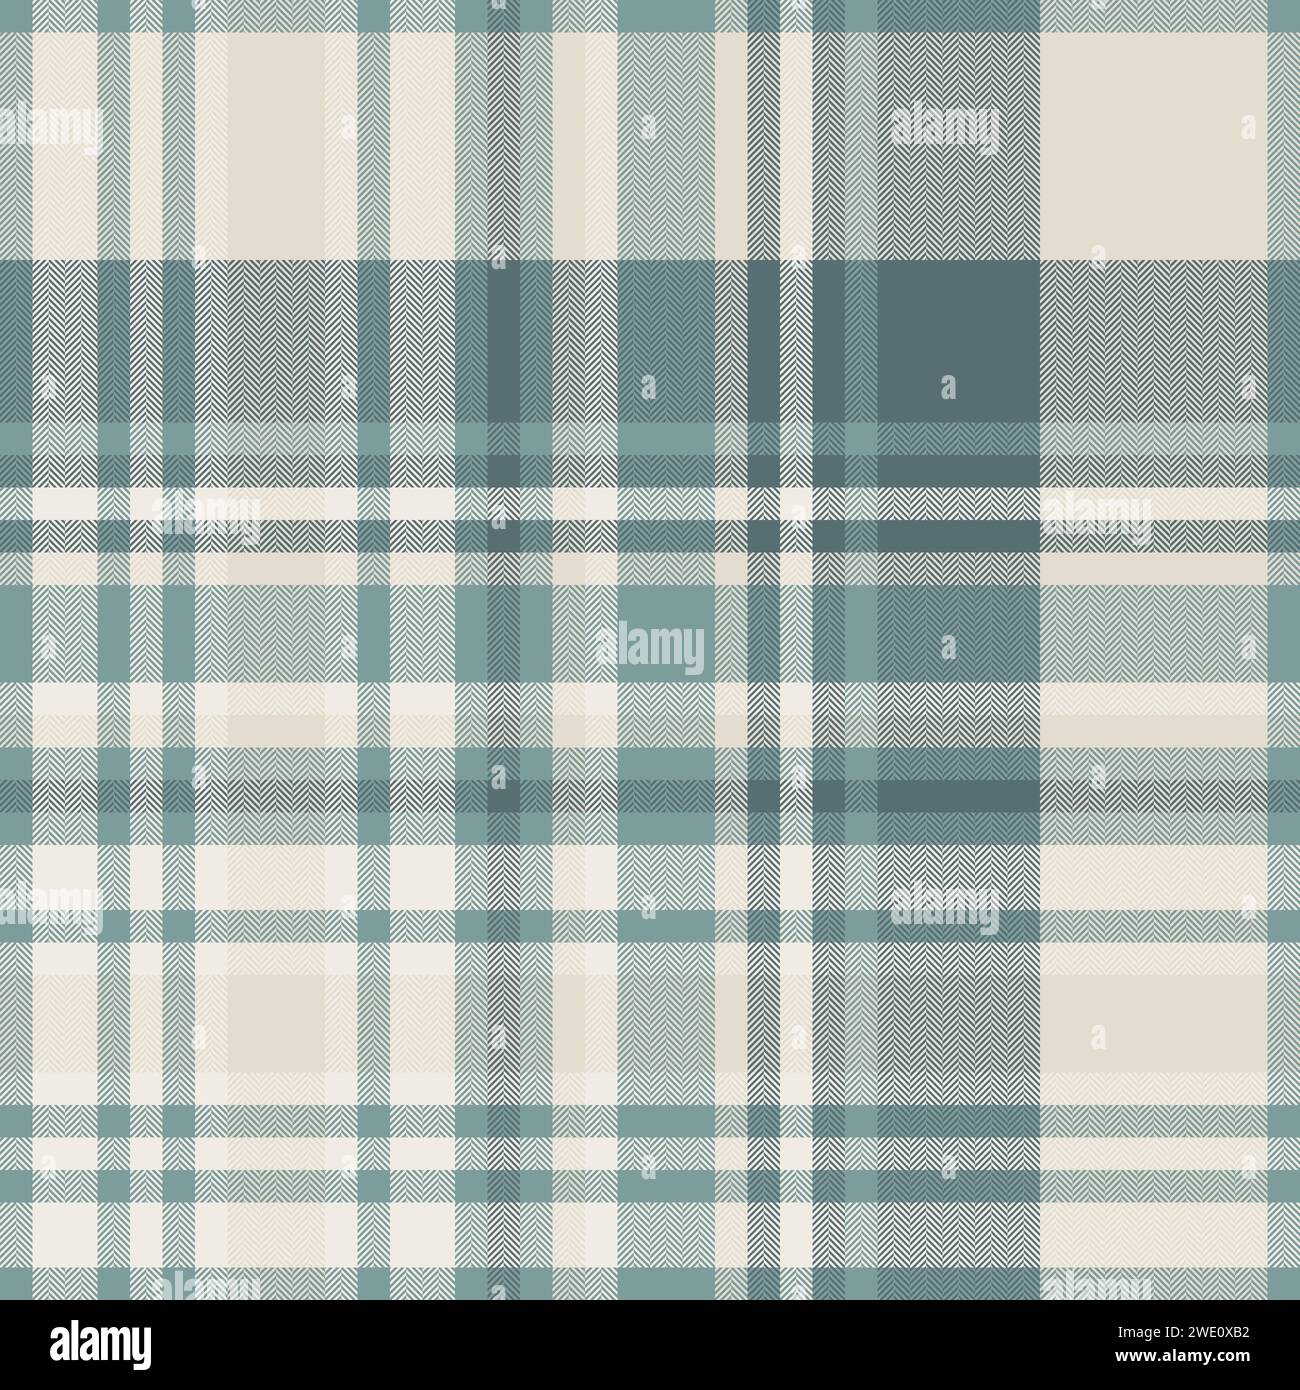 Hunter textile seamless background, outfit plaid vector texture. Perfect pattern fabric tartan check in pastel and light colors. Stock Vector